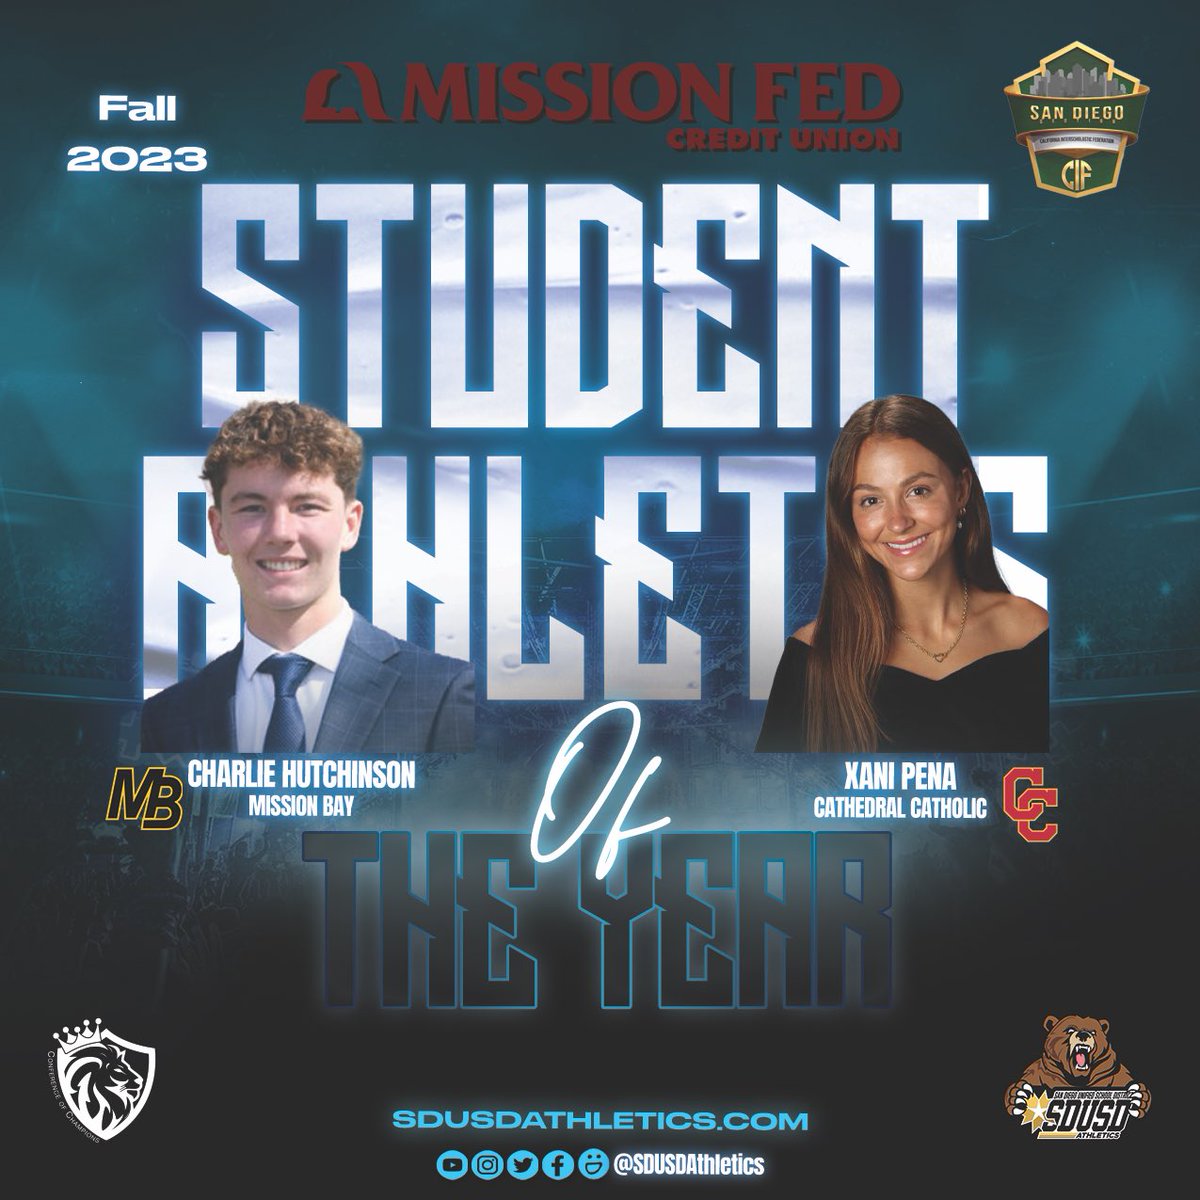 We extend our heartfelt congratulations to Charlie Hutchinson of @mbbuccaneers and Xani Peña of @cchsdonsathletics for their outstanding achievement as they have been honored with the prestigious title of the @missionfed Student Athletes of the Year for the 2023 Fall Season.